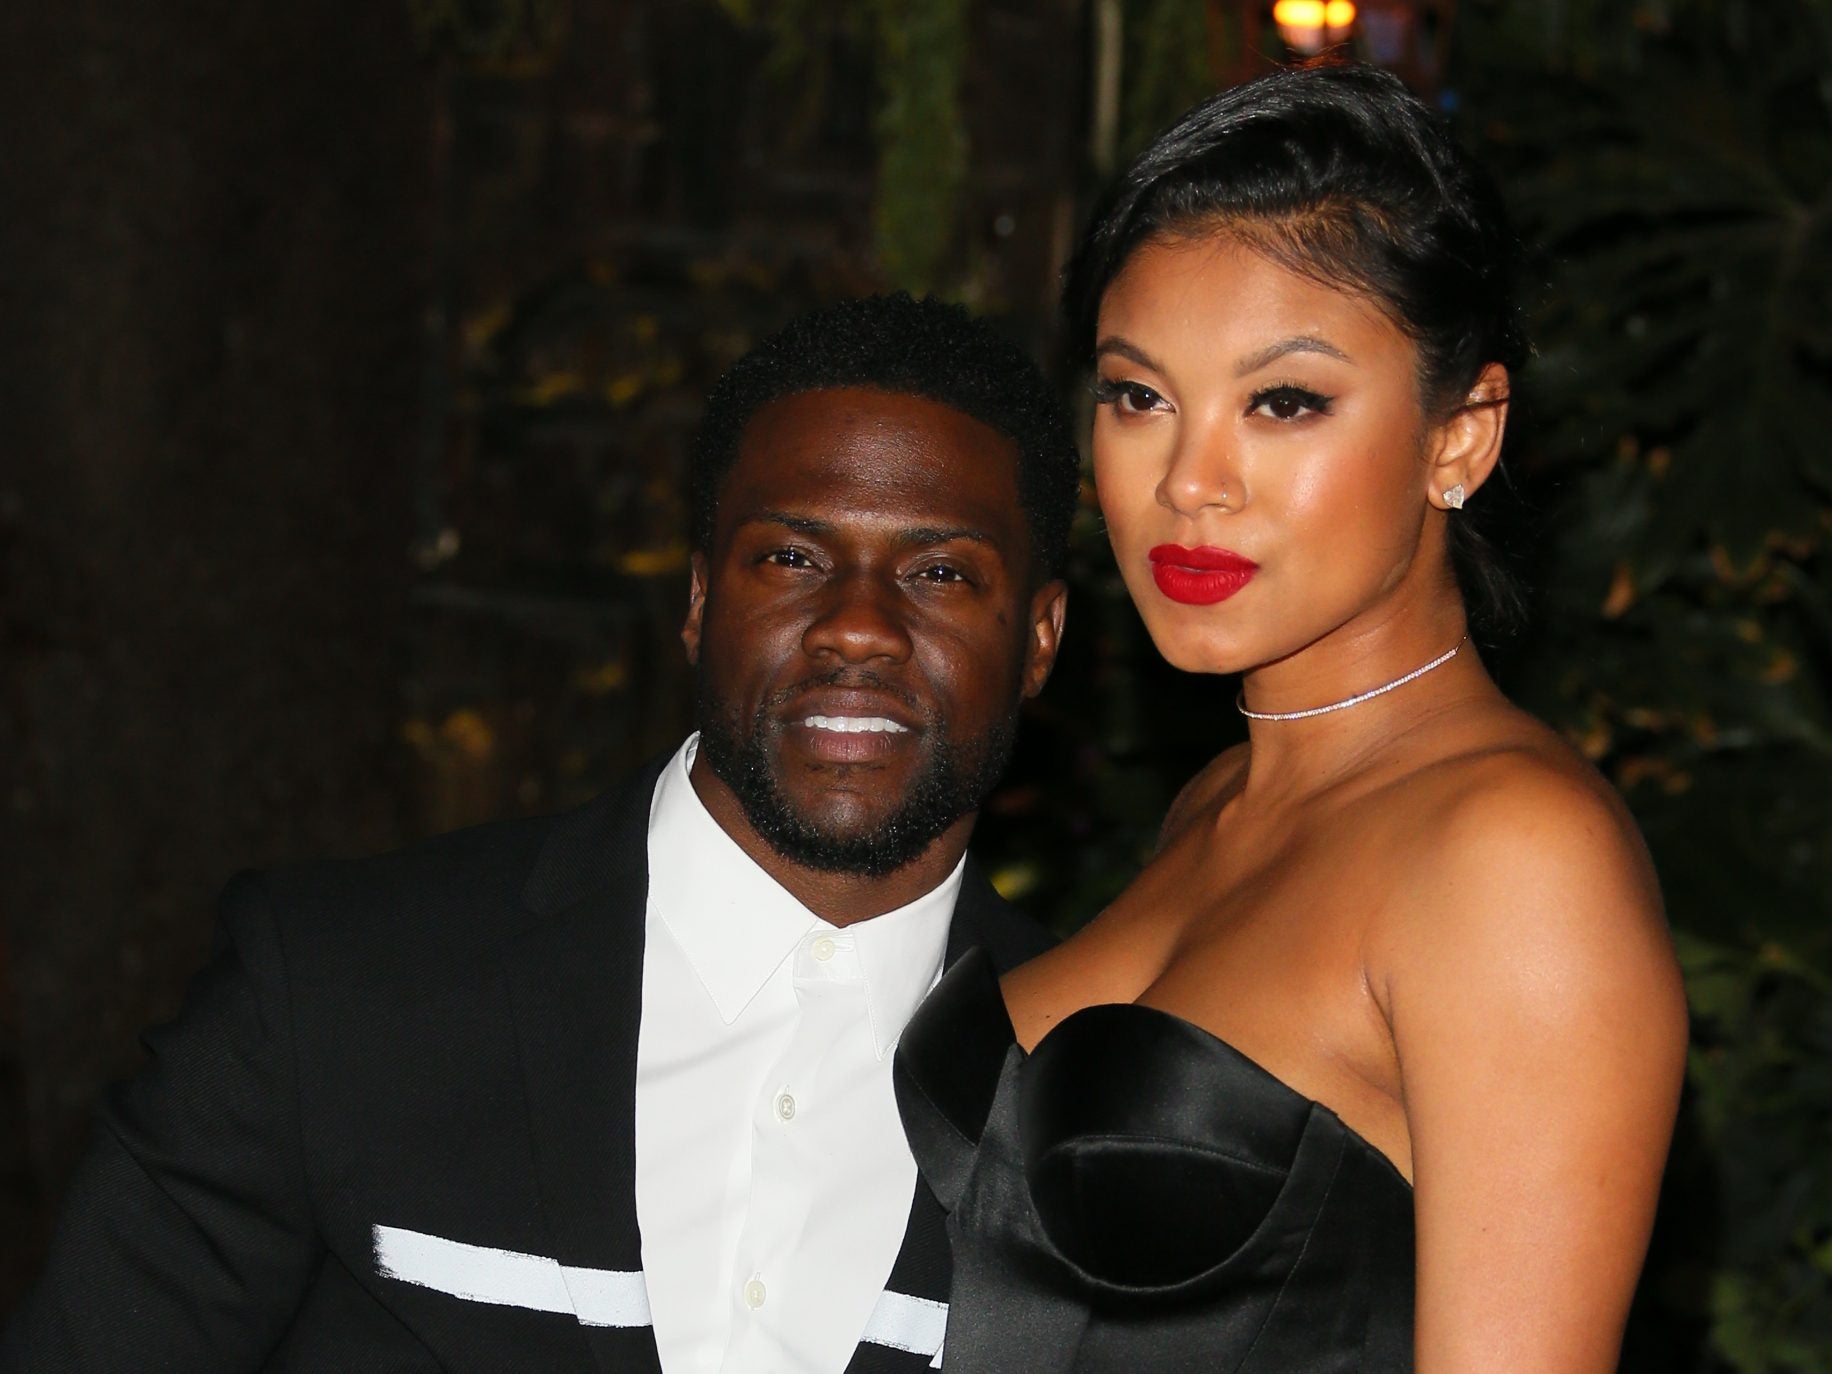 Kevin Harts Wife Eniko Found About His photo